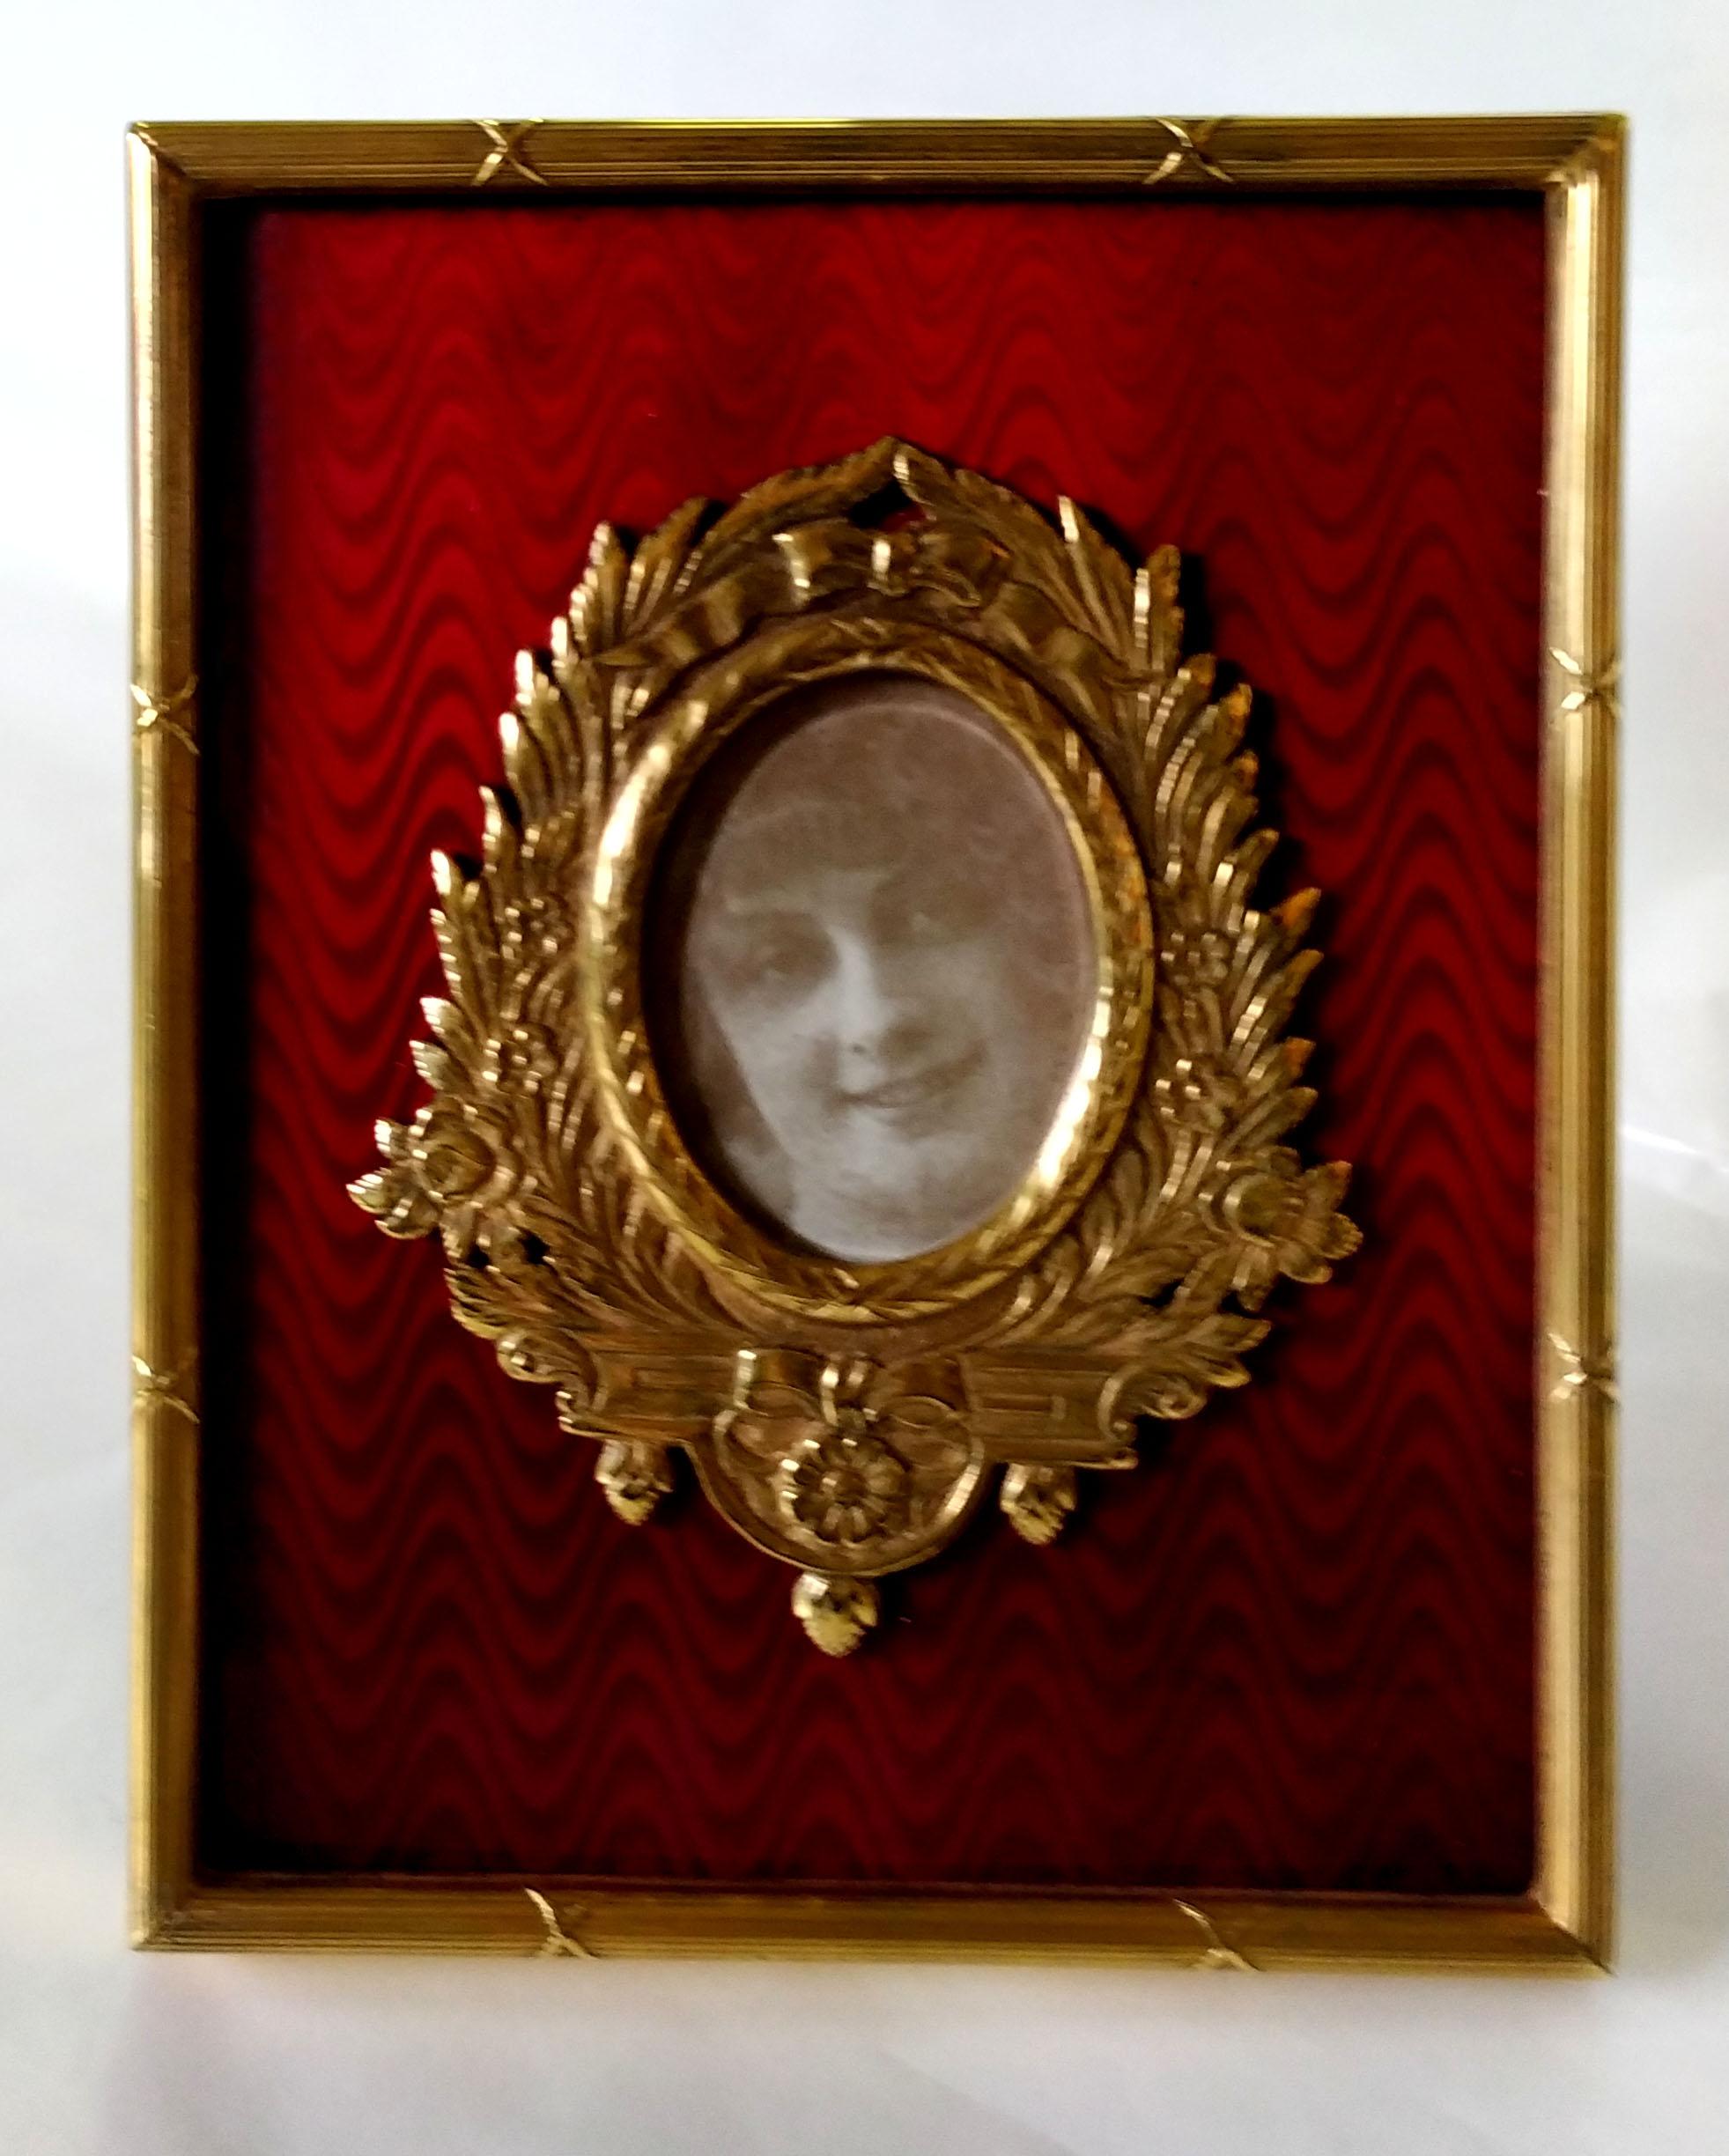 Rectangular photo frame in 925/1000 sterling silver gold plated with translucent fired enamel on guillochè, with French Empire Louis XVI style border and rich ornamentation around the oval of cm. 3 x 4. External measurement cm. 10.2 x 12.7. Weight